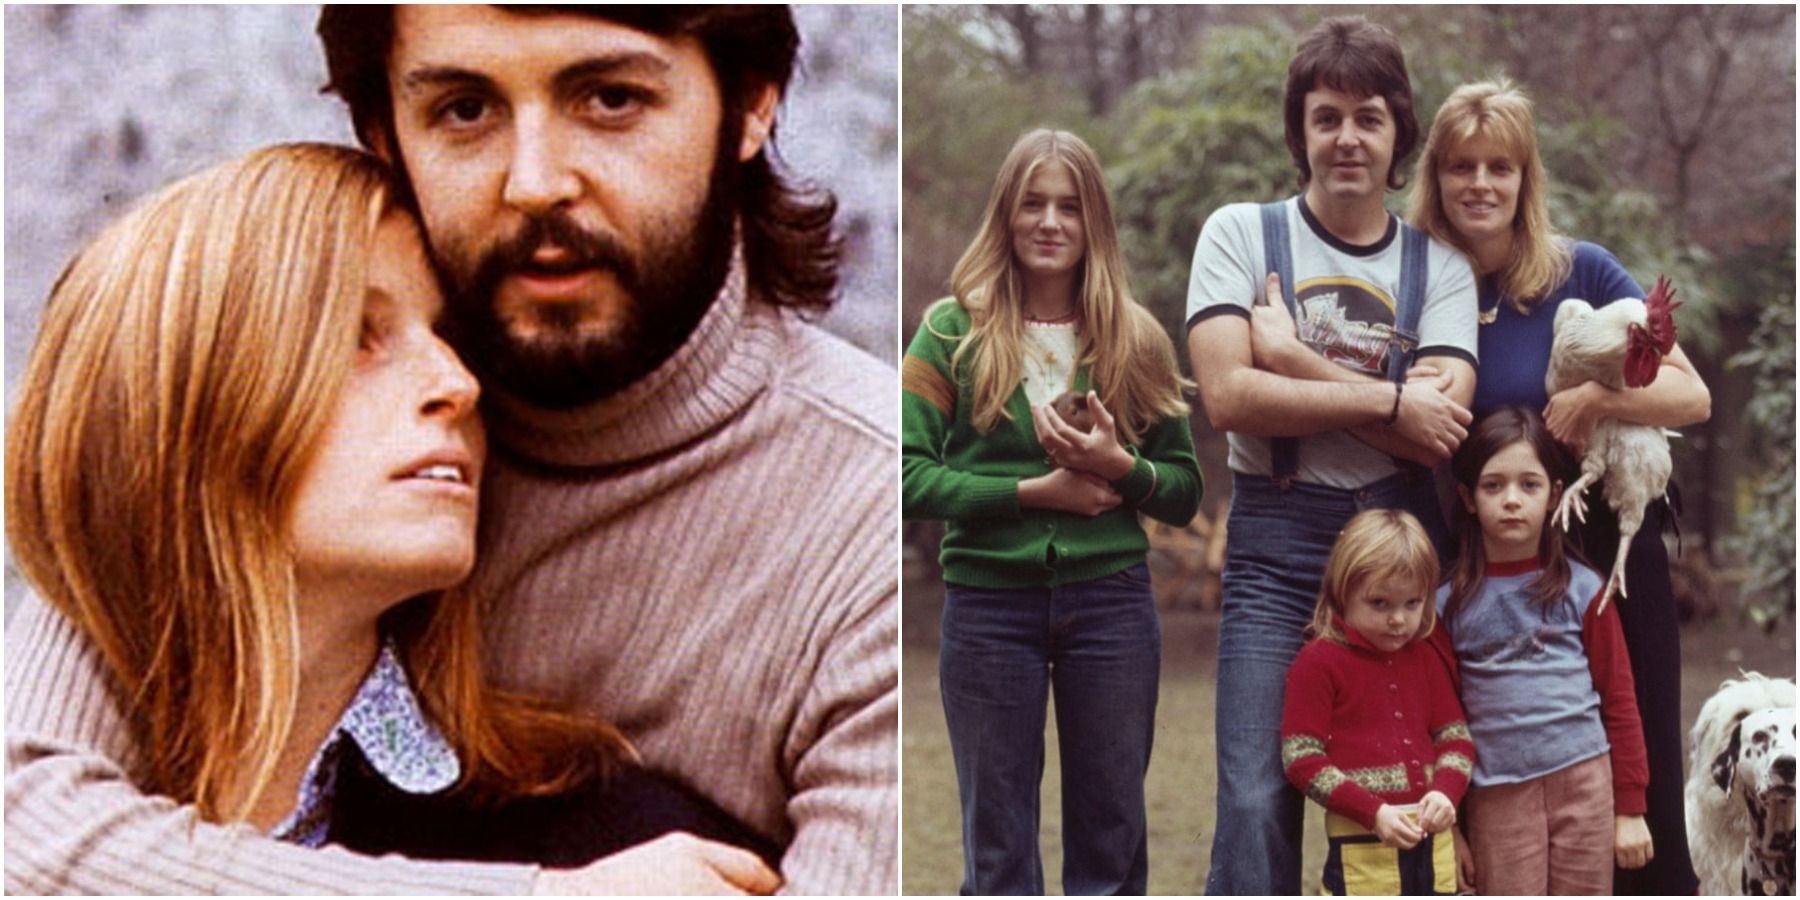 Paul & Linda McCartney: 10 Facts You Didn't Know About Their